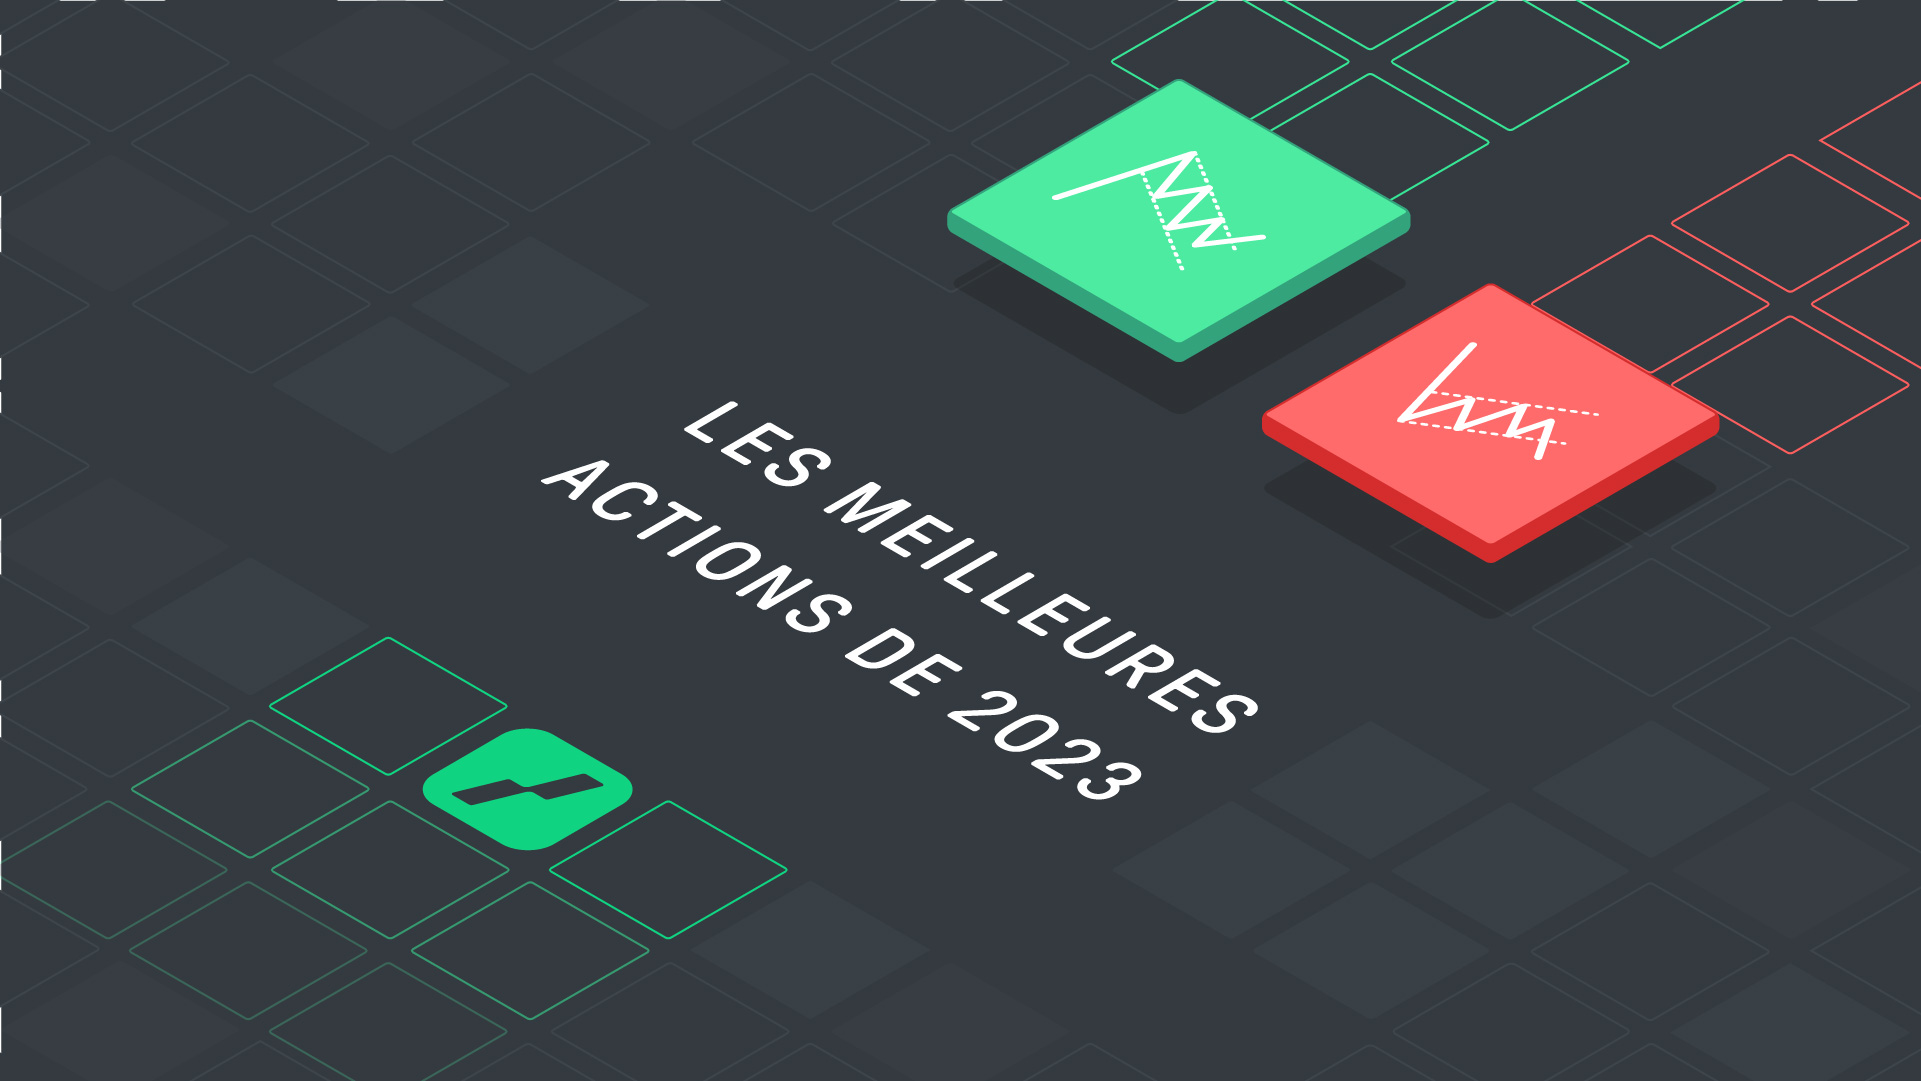 meilleures actions - featured image